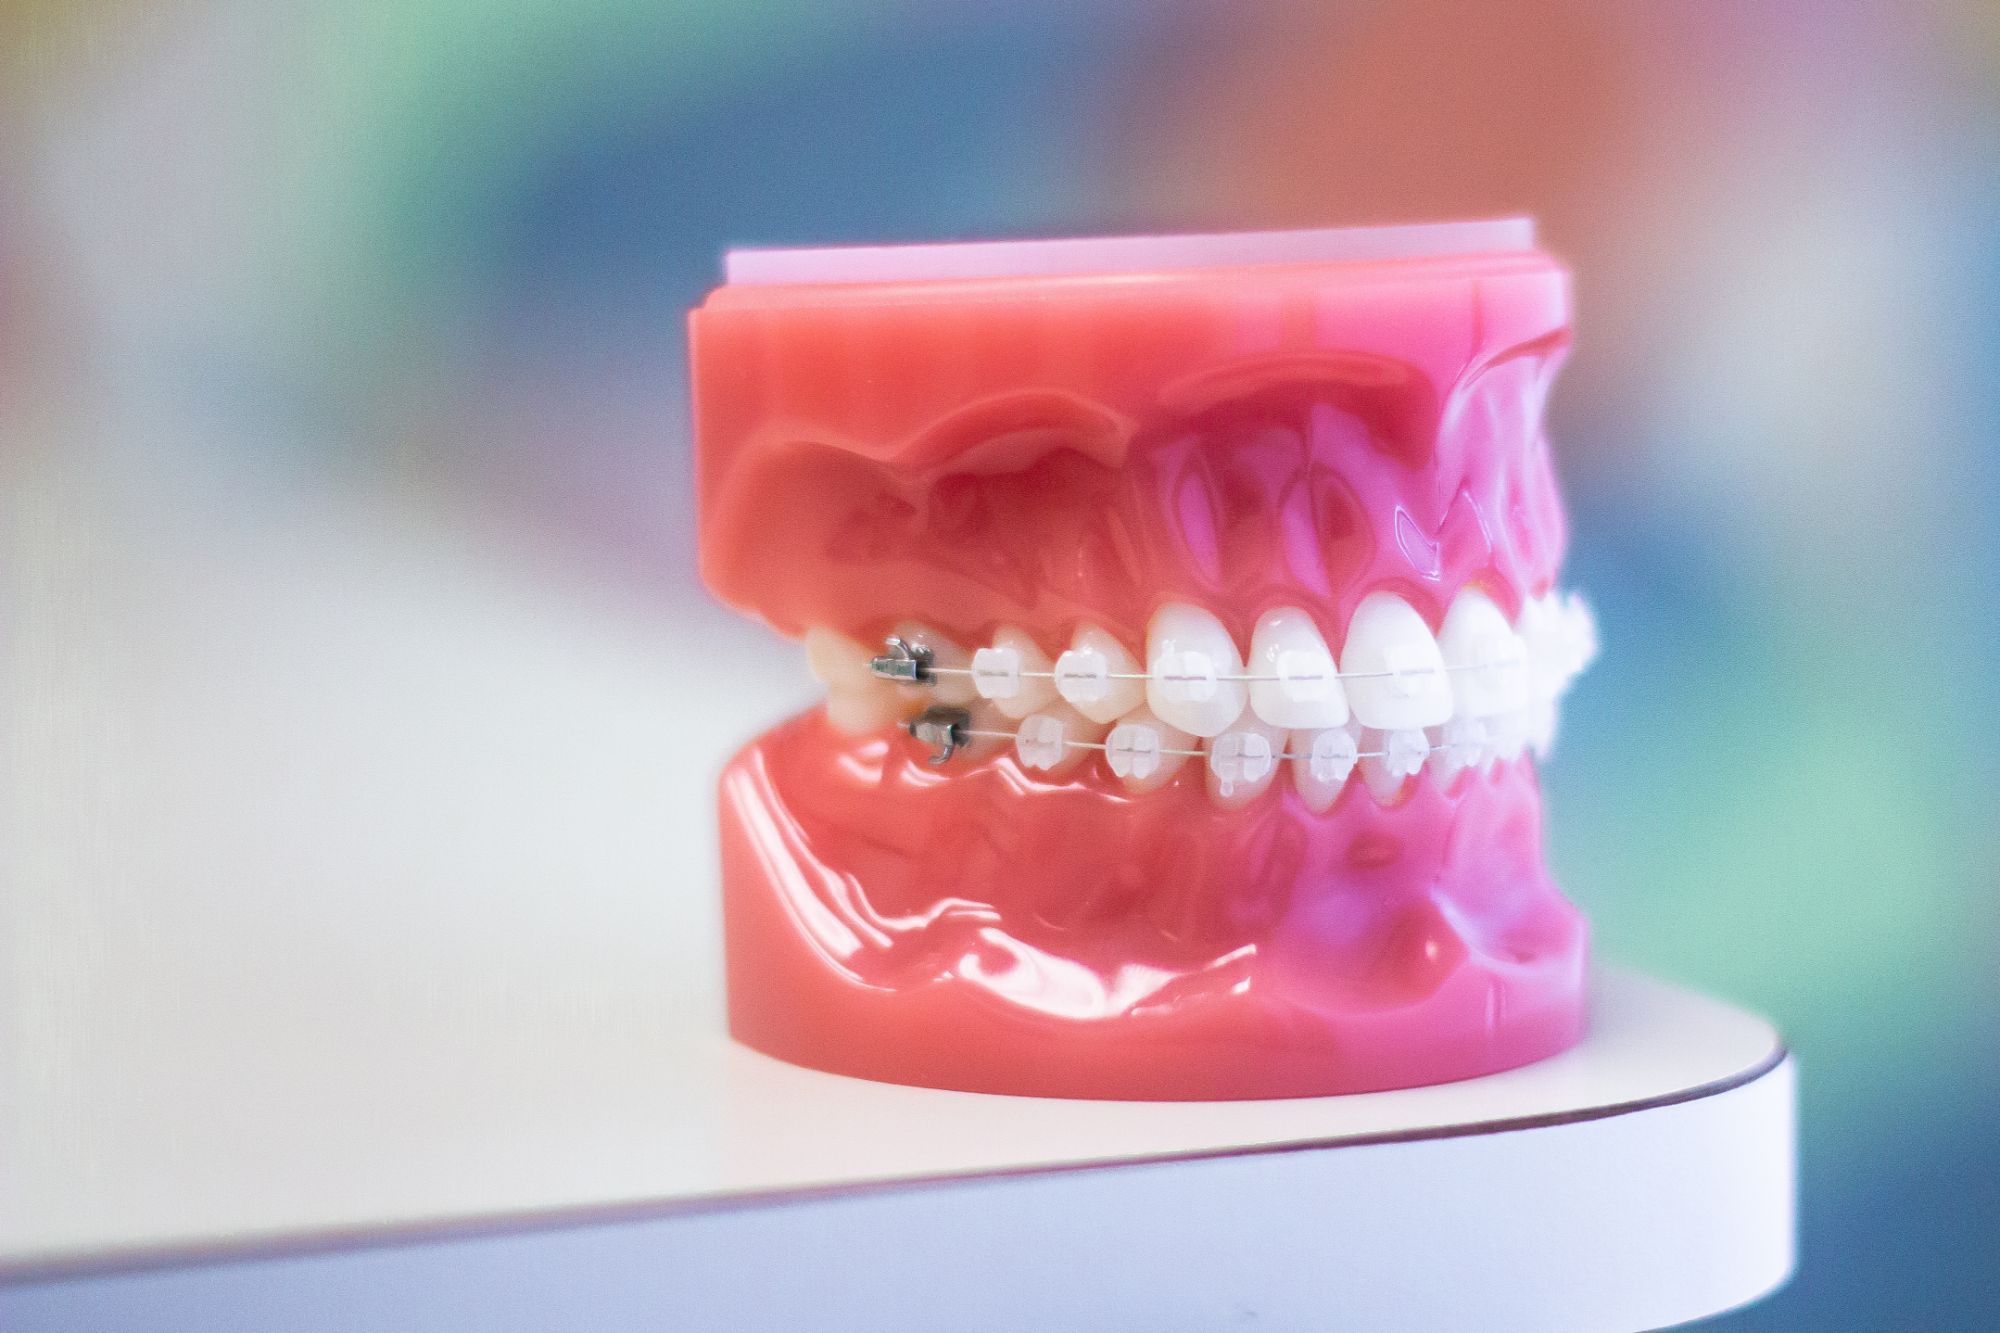 Ceramic Braces: What are They? A Discreet Orthodontic Solution at